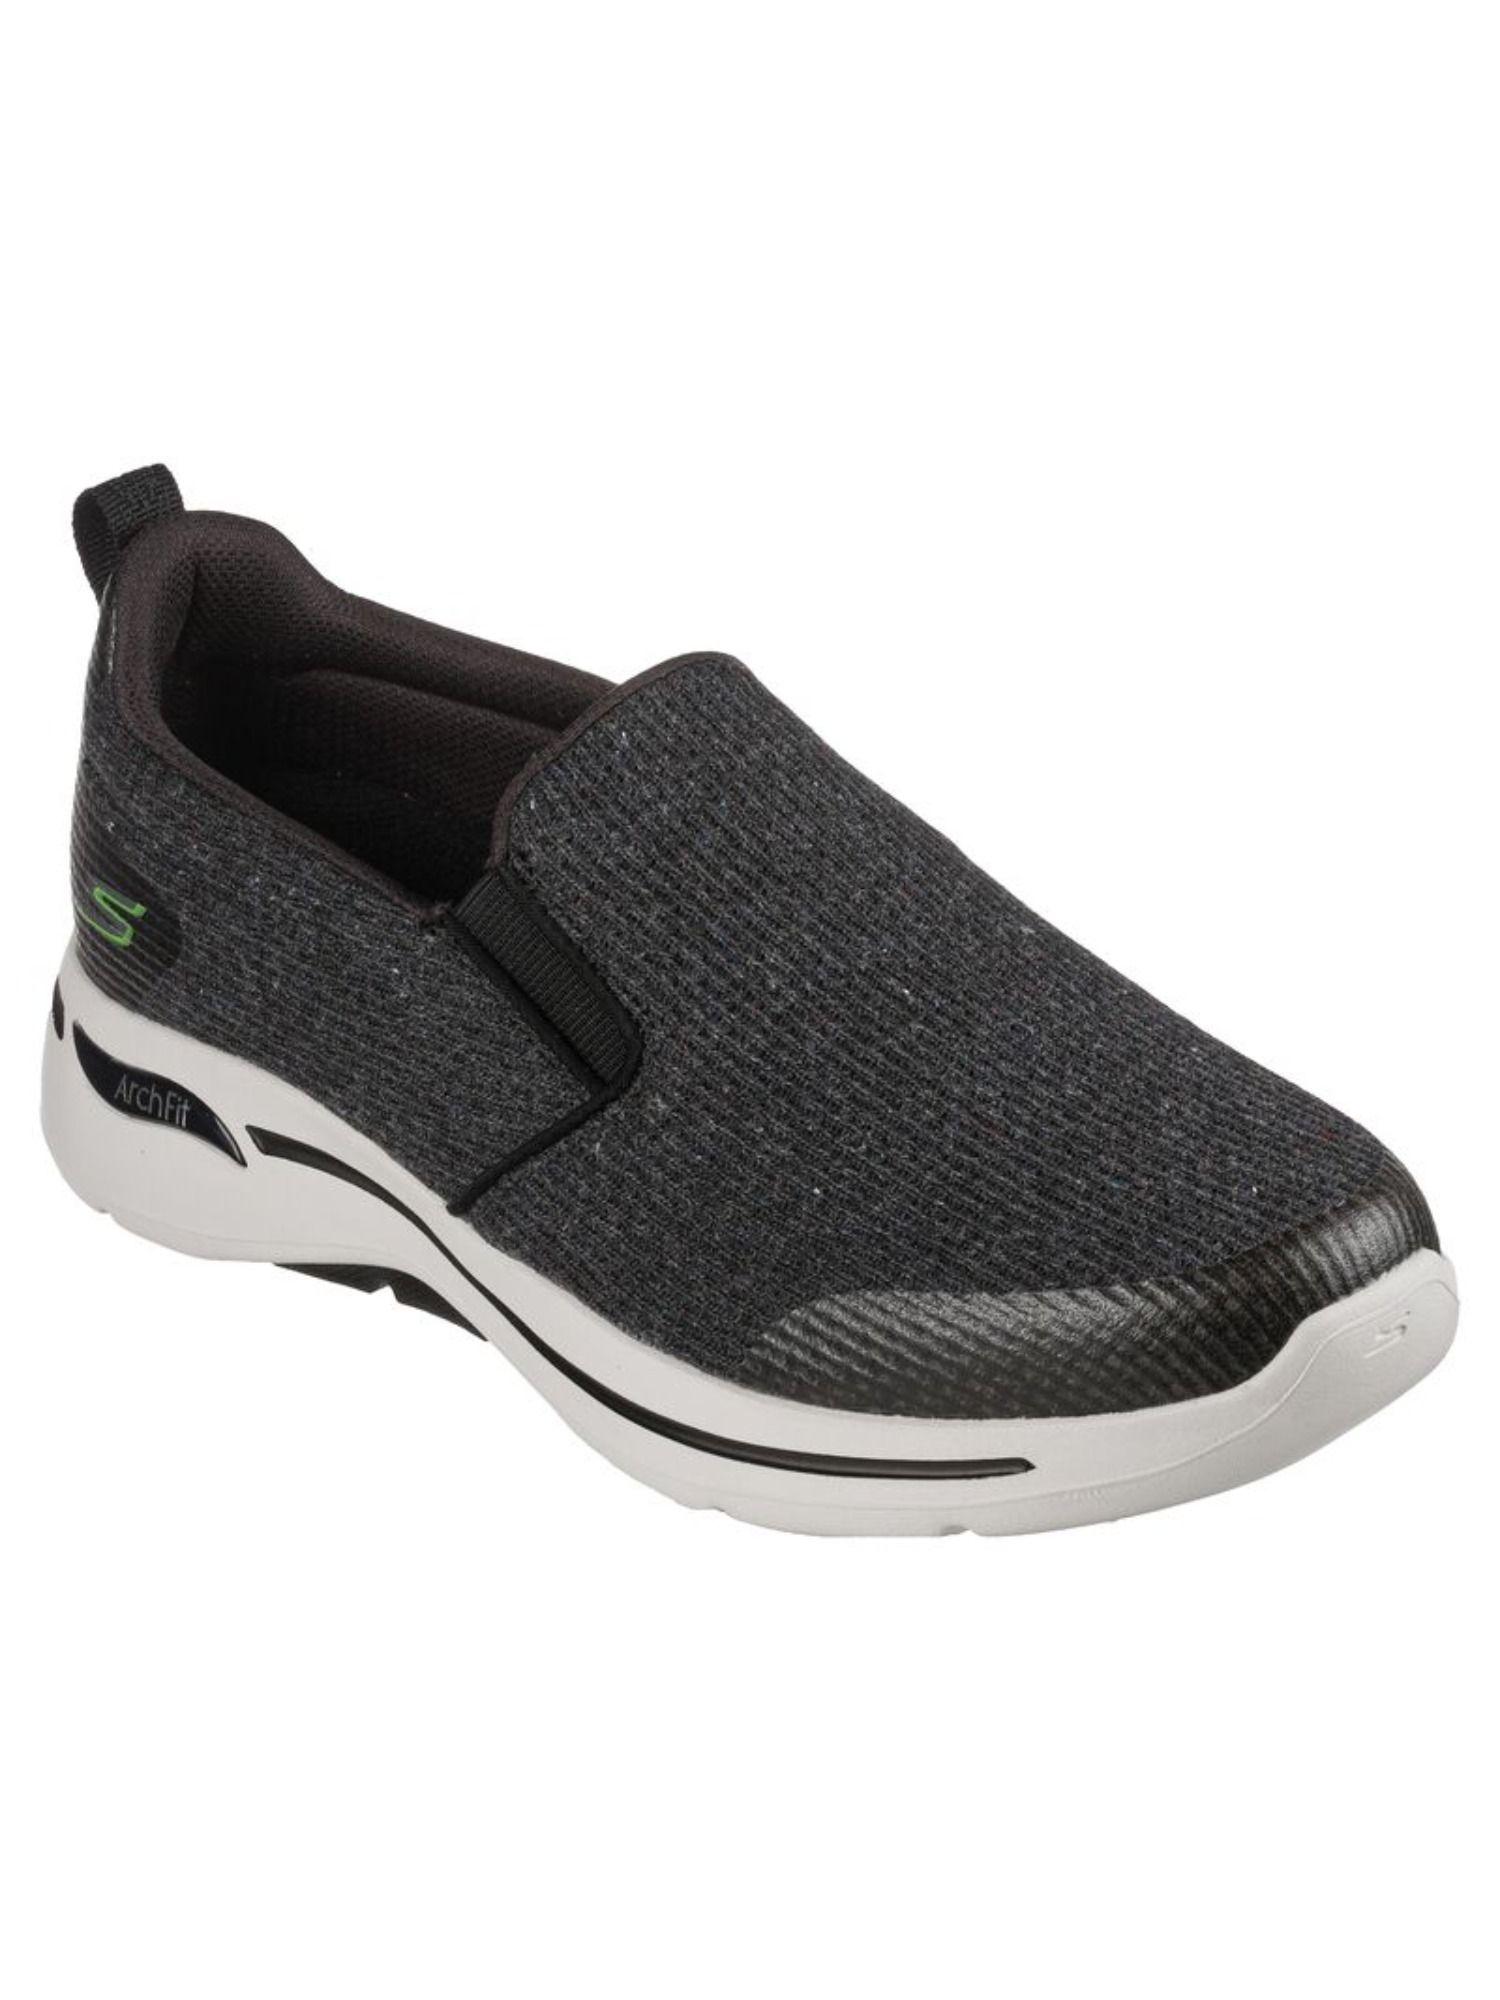 go walk arch fit - our earth black arch fit walking shoes